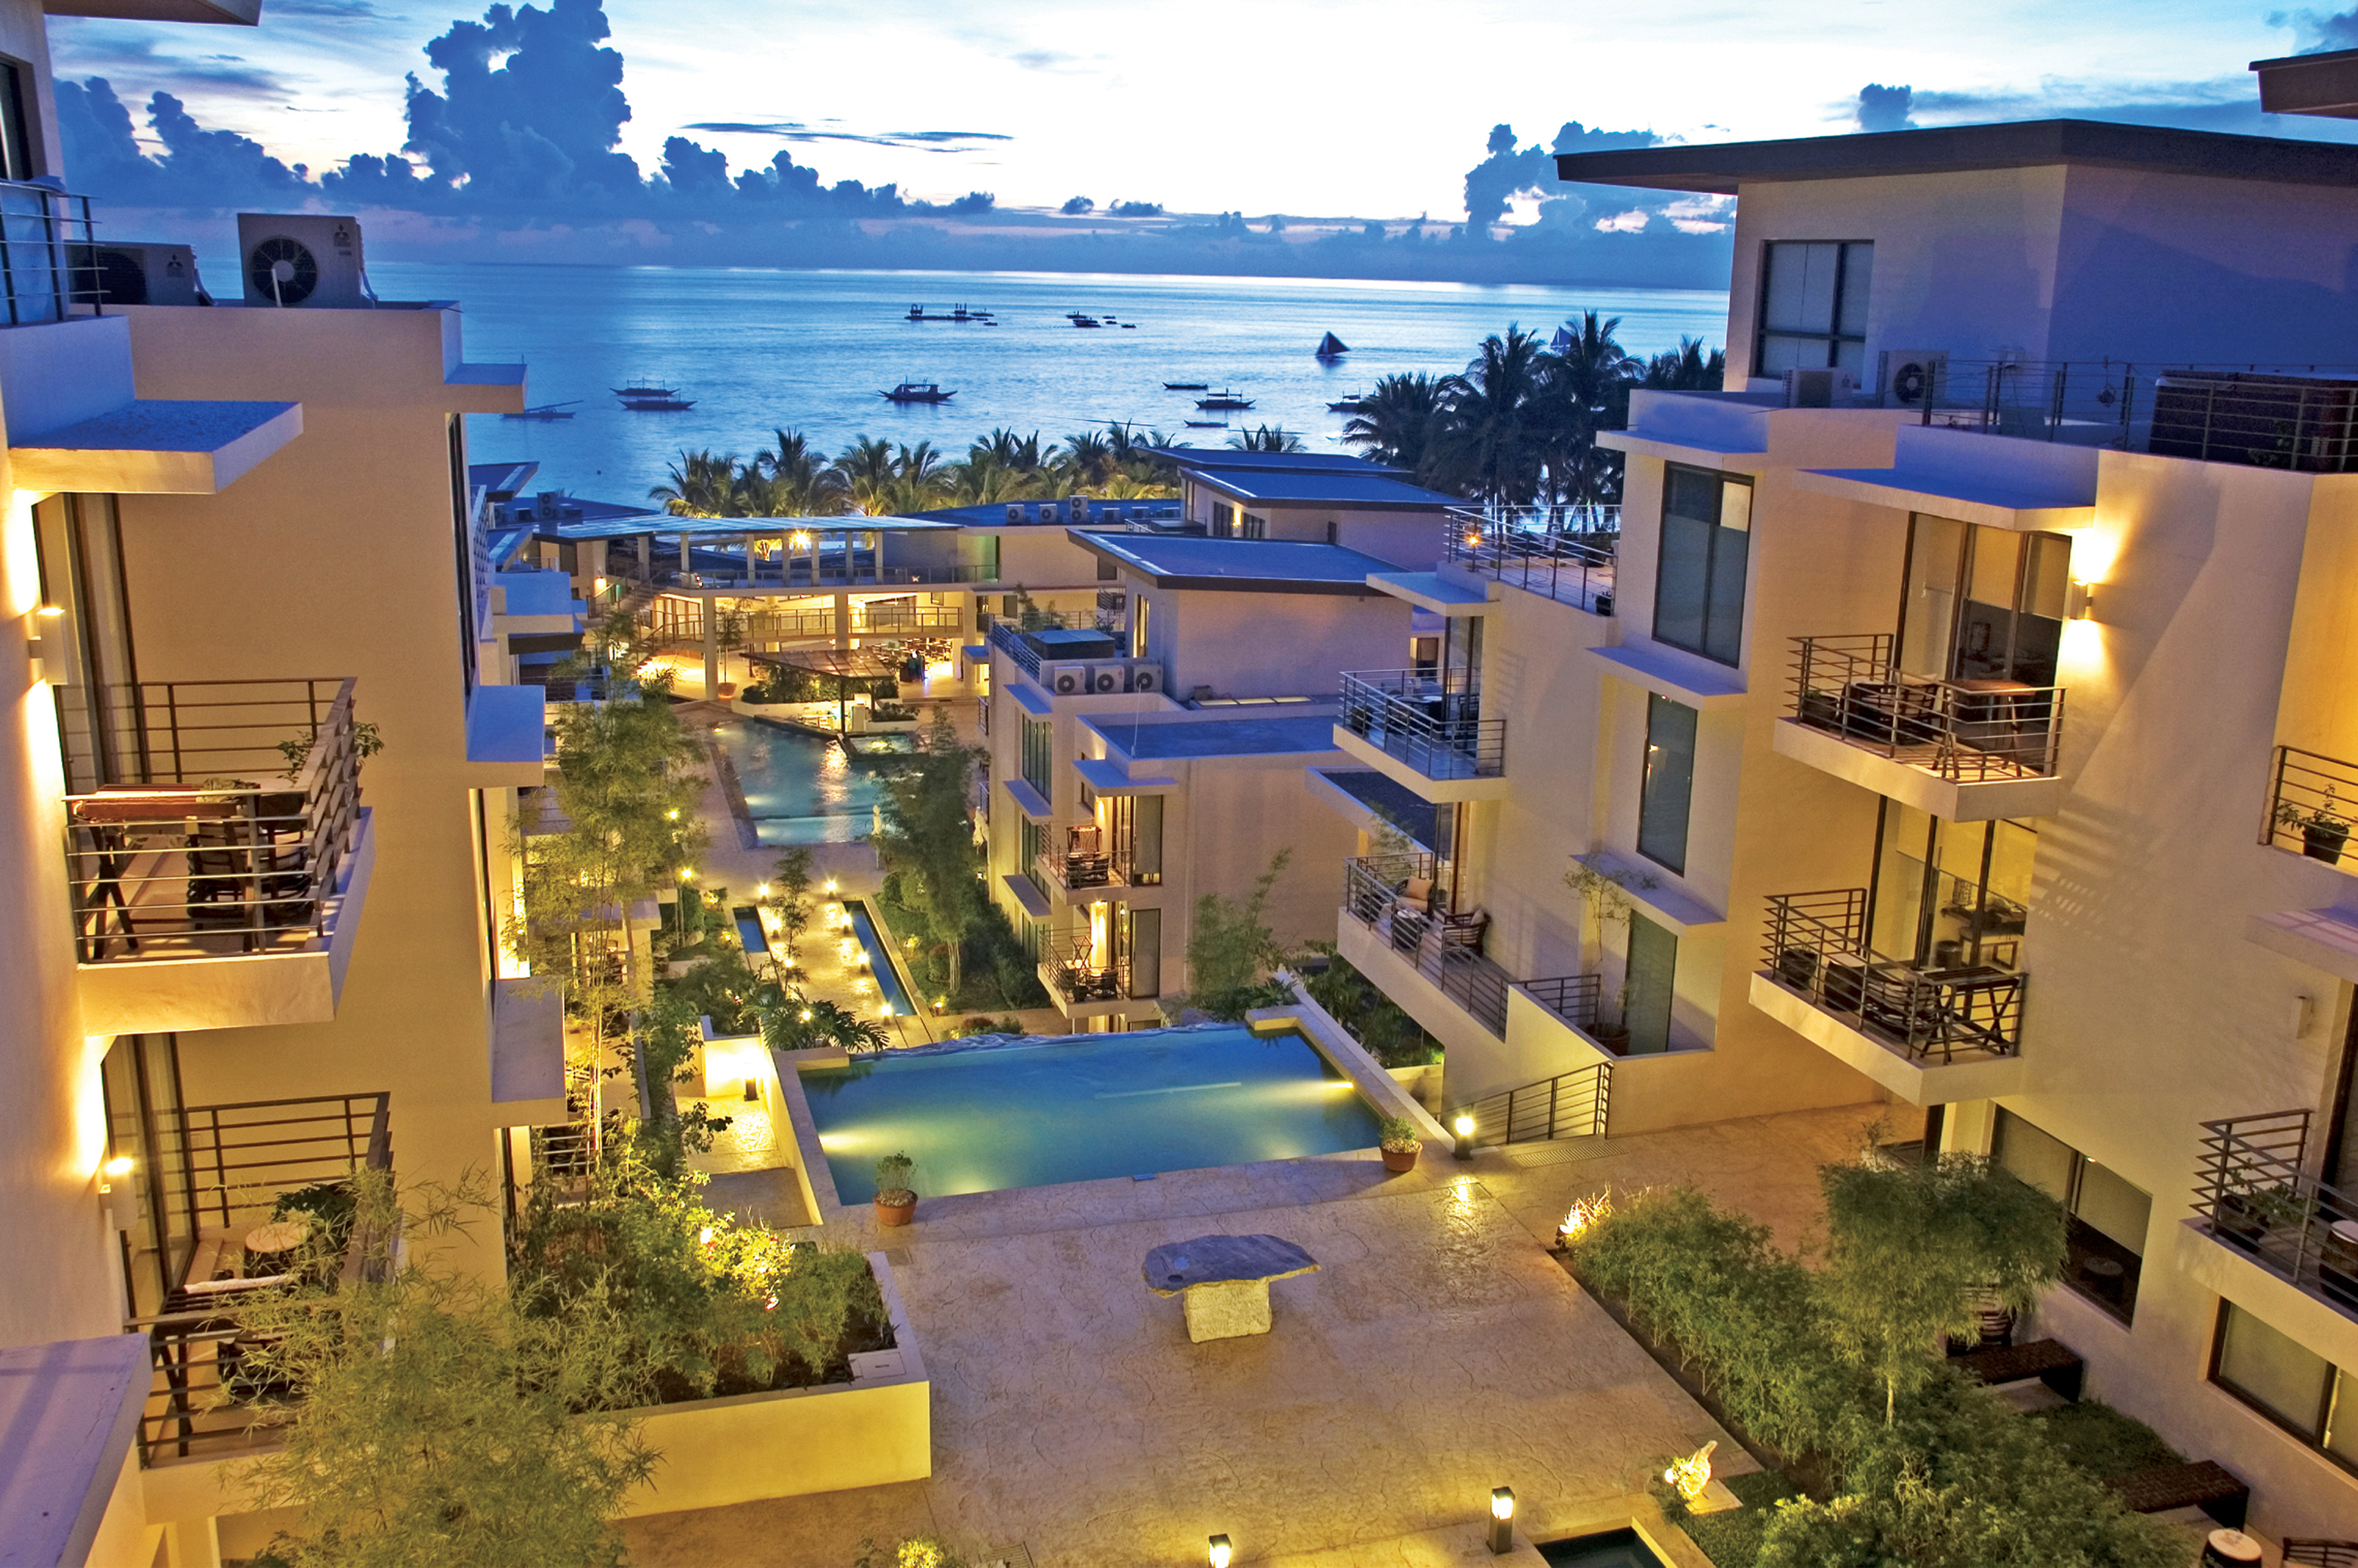 Luxury 5 star resort in boracay discovery shores boracay for Ideal hotel design